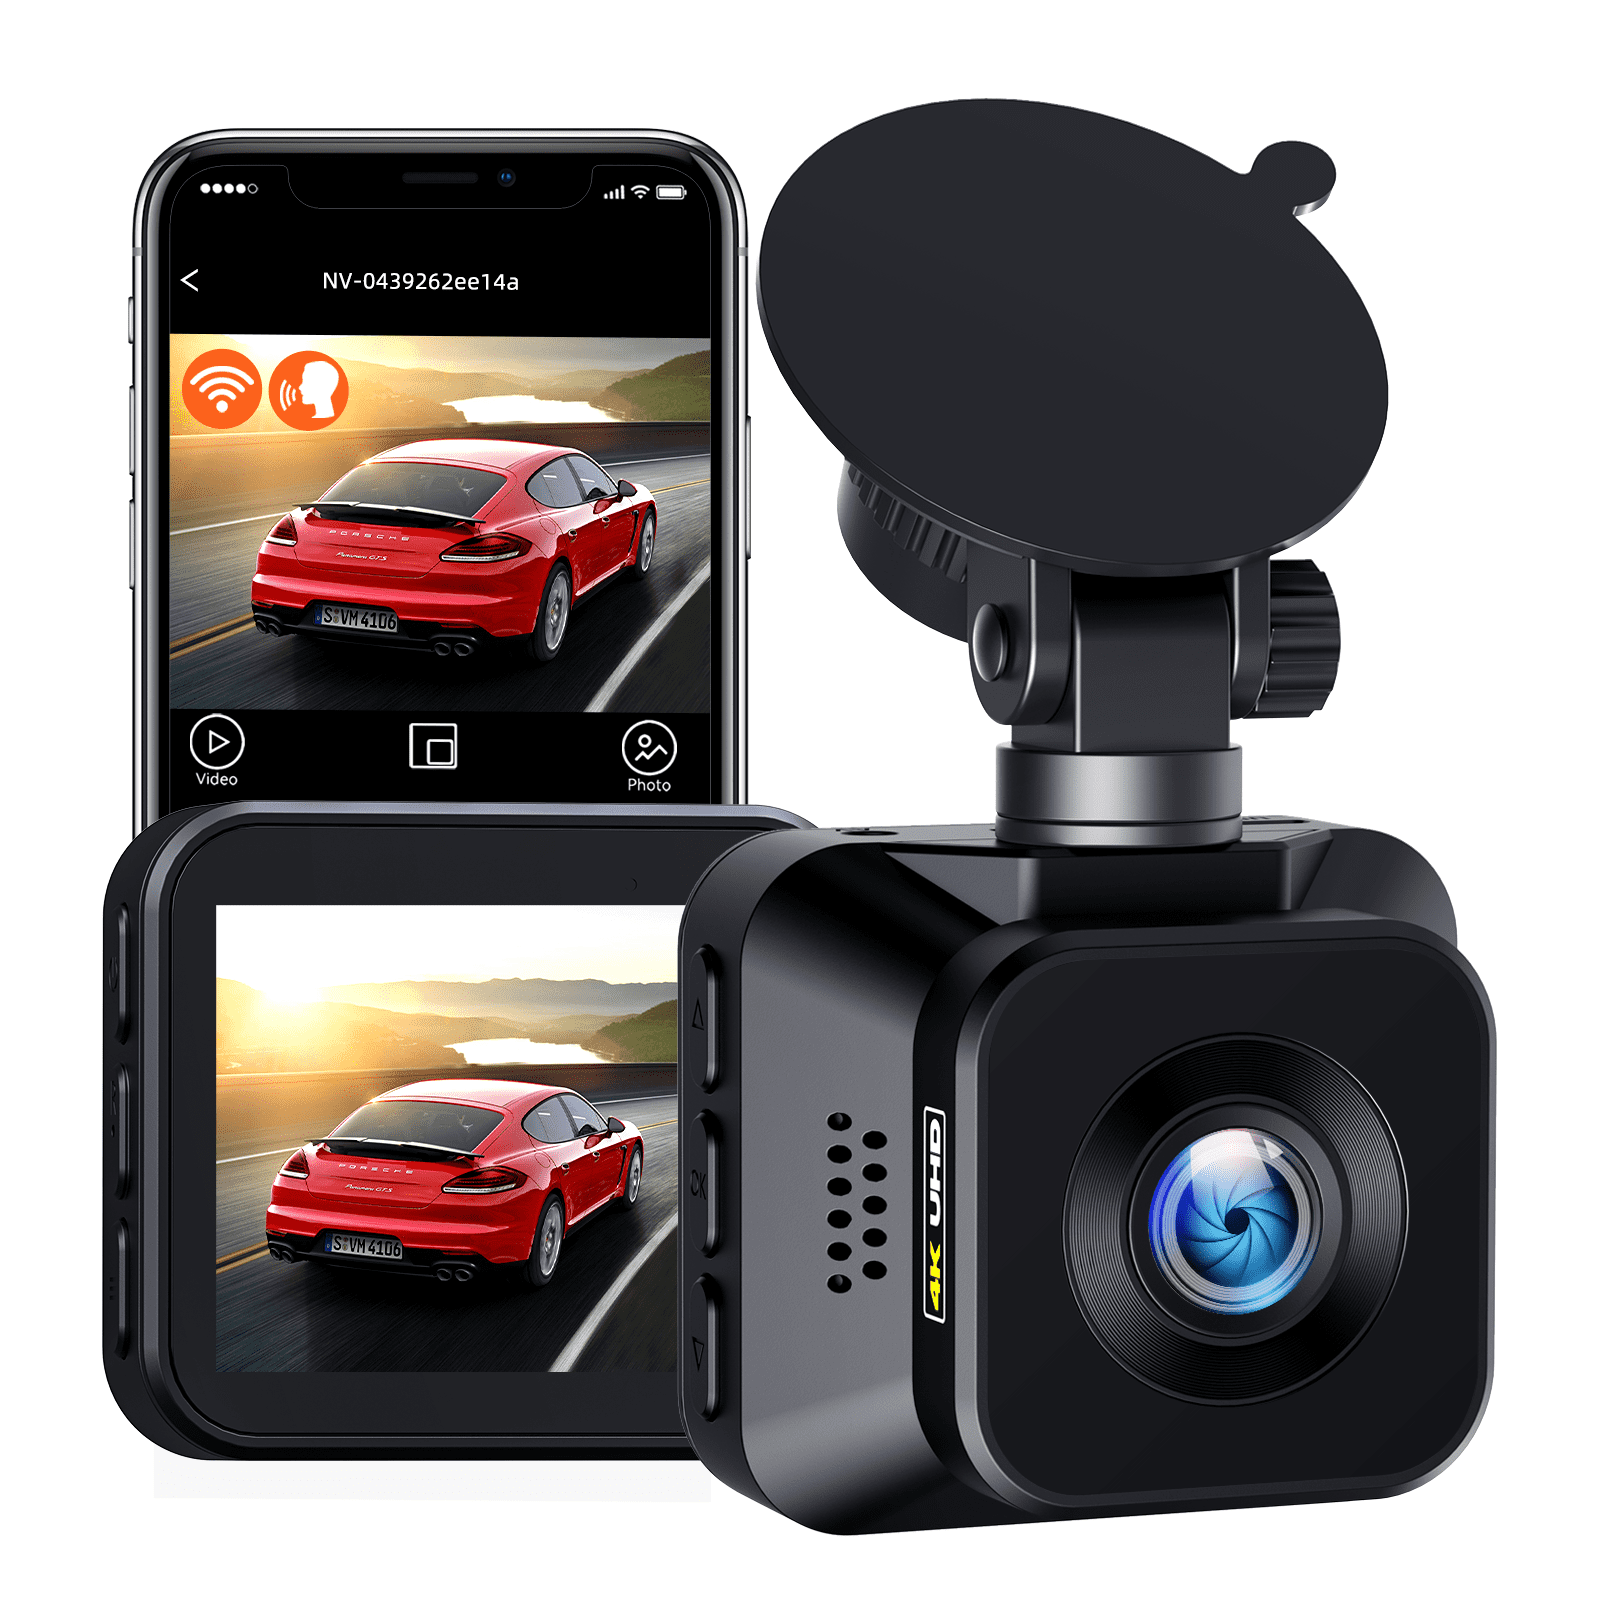 LAMTTO Dash Cam 4K Wifi 2160P Car Camera Mini Front Dash Camera for Cars  with Night Vision 64GB SD Card, APP Control, Voice Prompt, G-Sensor,  Parking